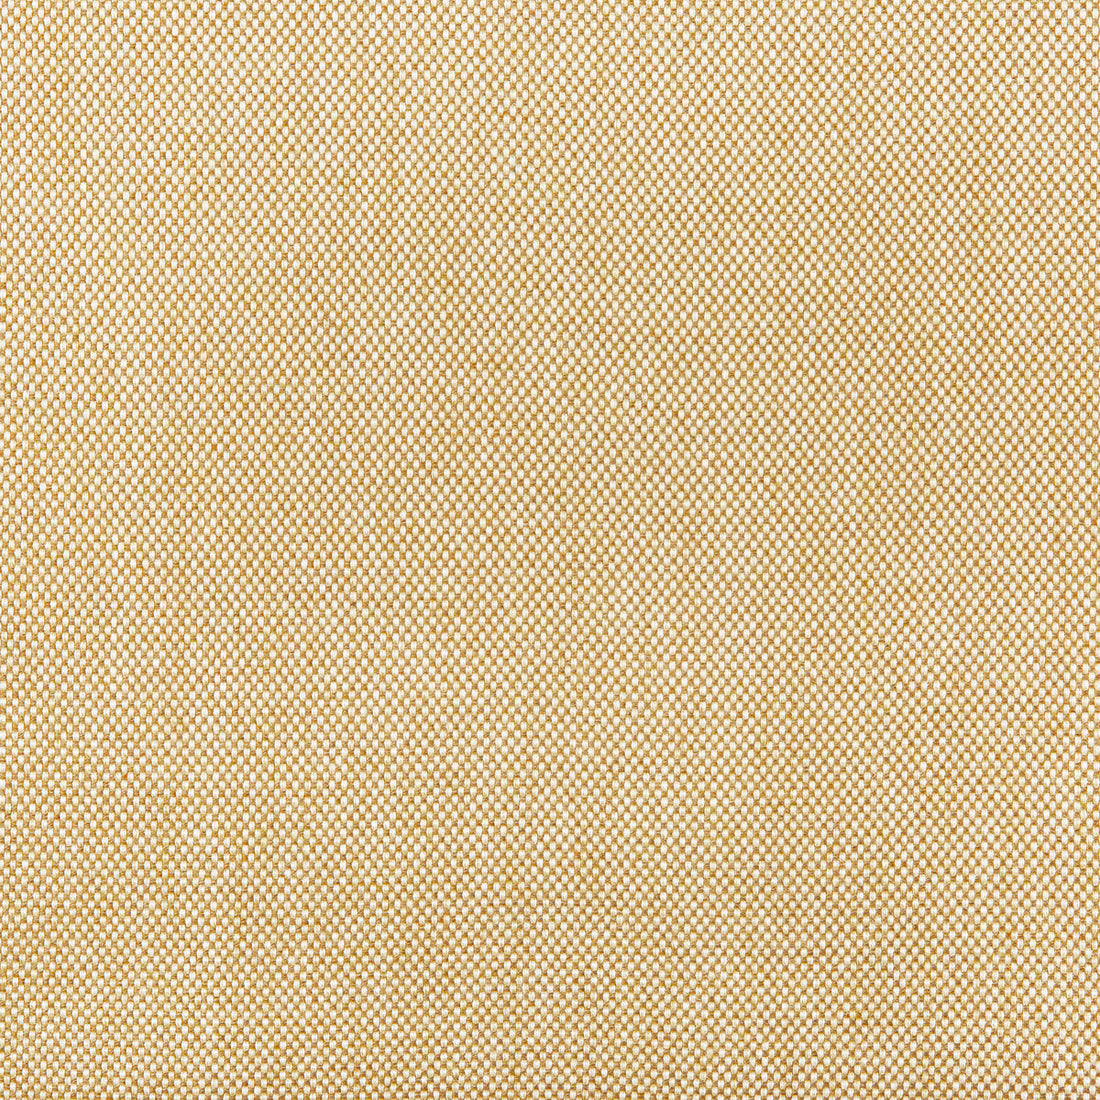 Kravet Basics fabric in 36829-16 color - pattern 36829.16.0 - by Kravet Basics in the Indoor / Outdoor collection